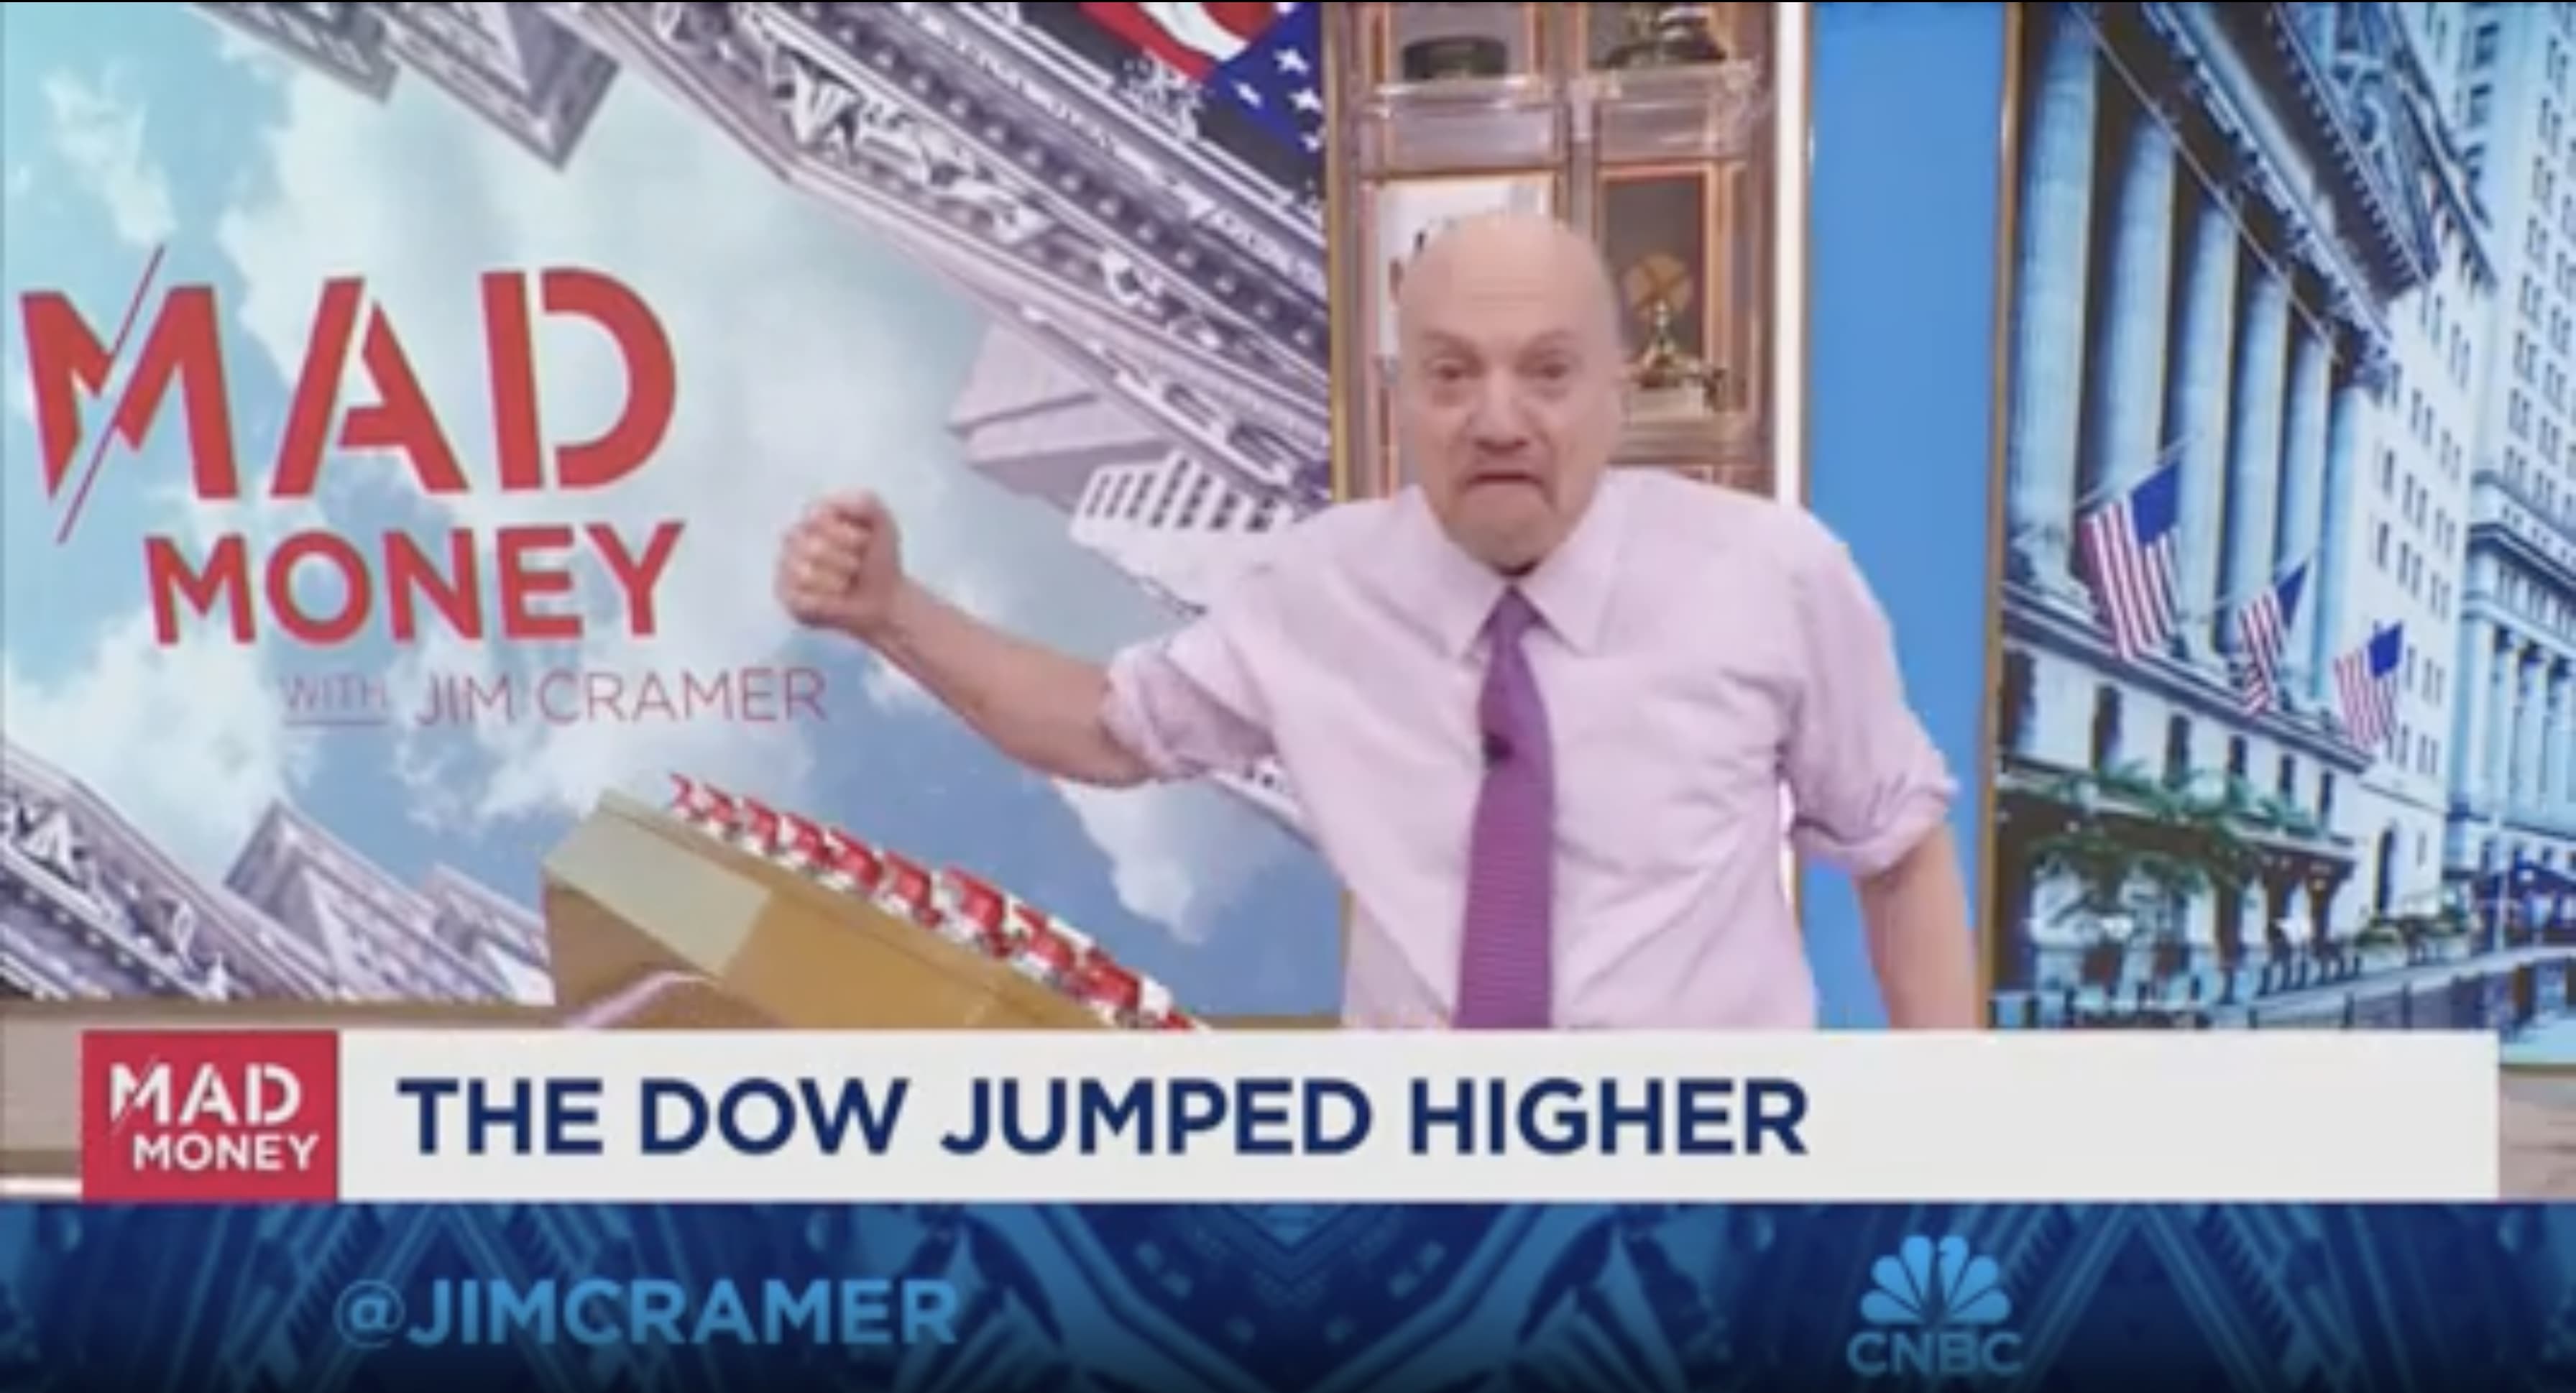 A lot of high flying stocks opened big this morning, only to give it back, says Jim Cramer